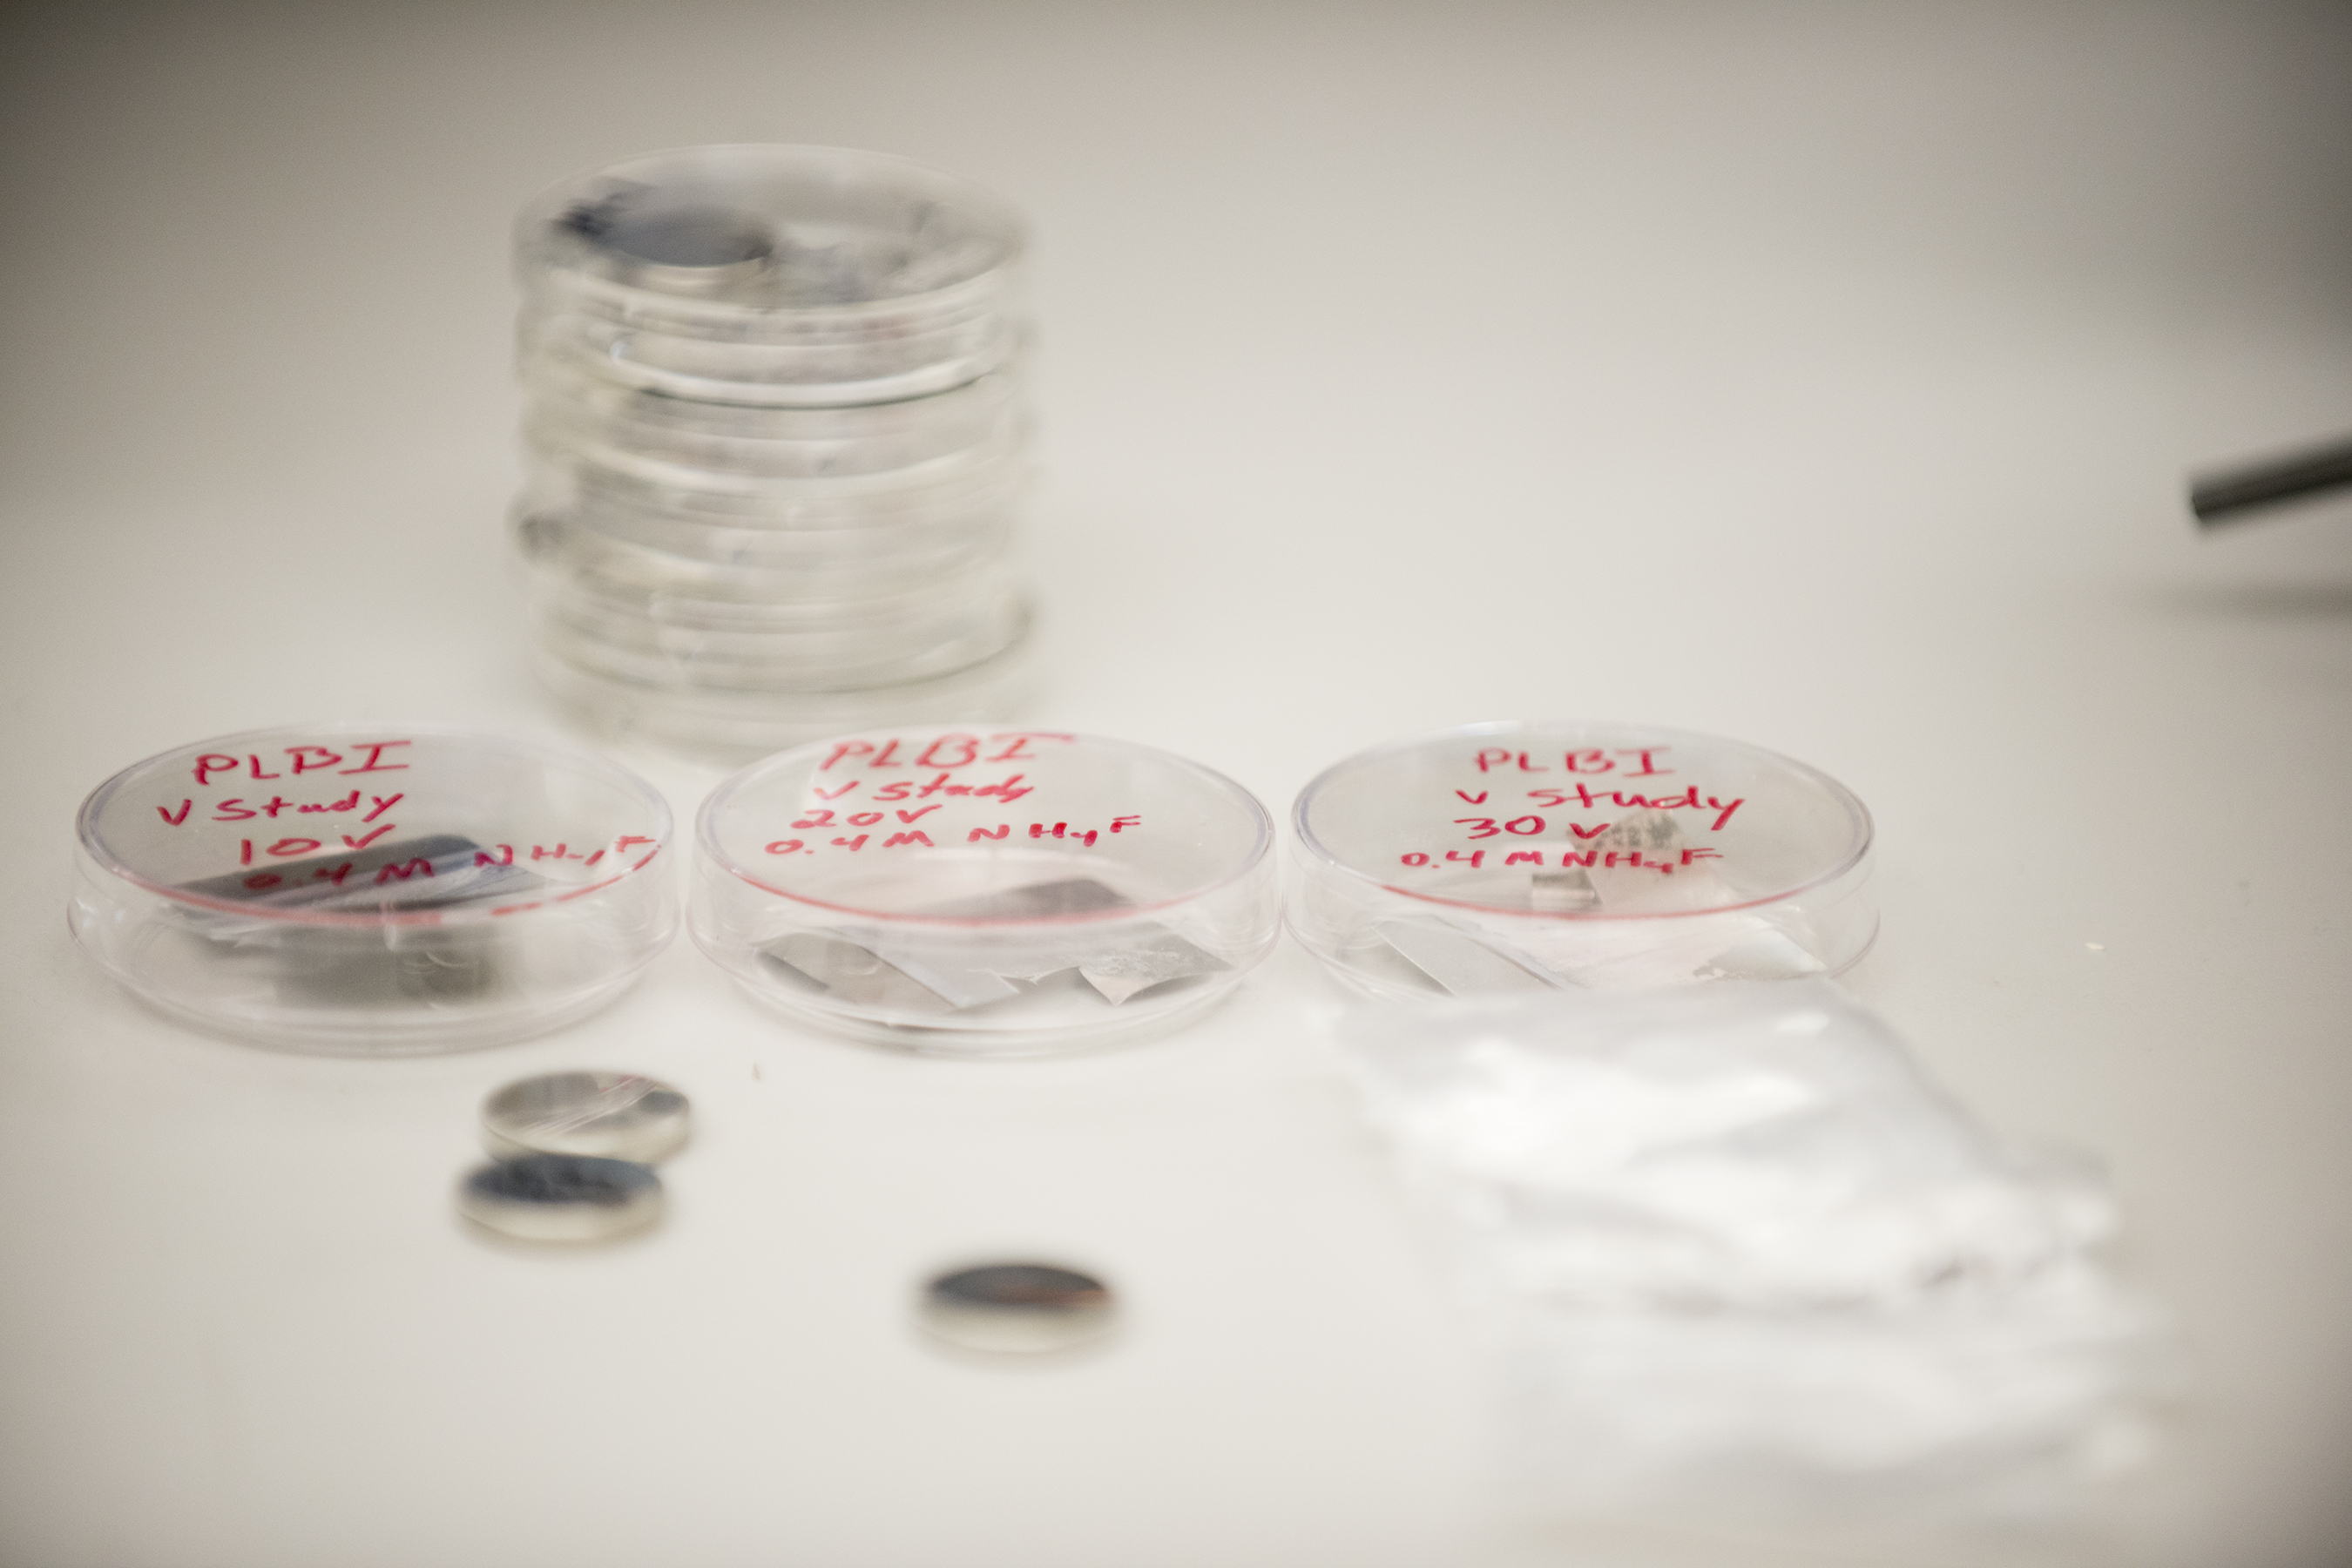 clear circular containers in an electrochemical energy materials laboratory